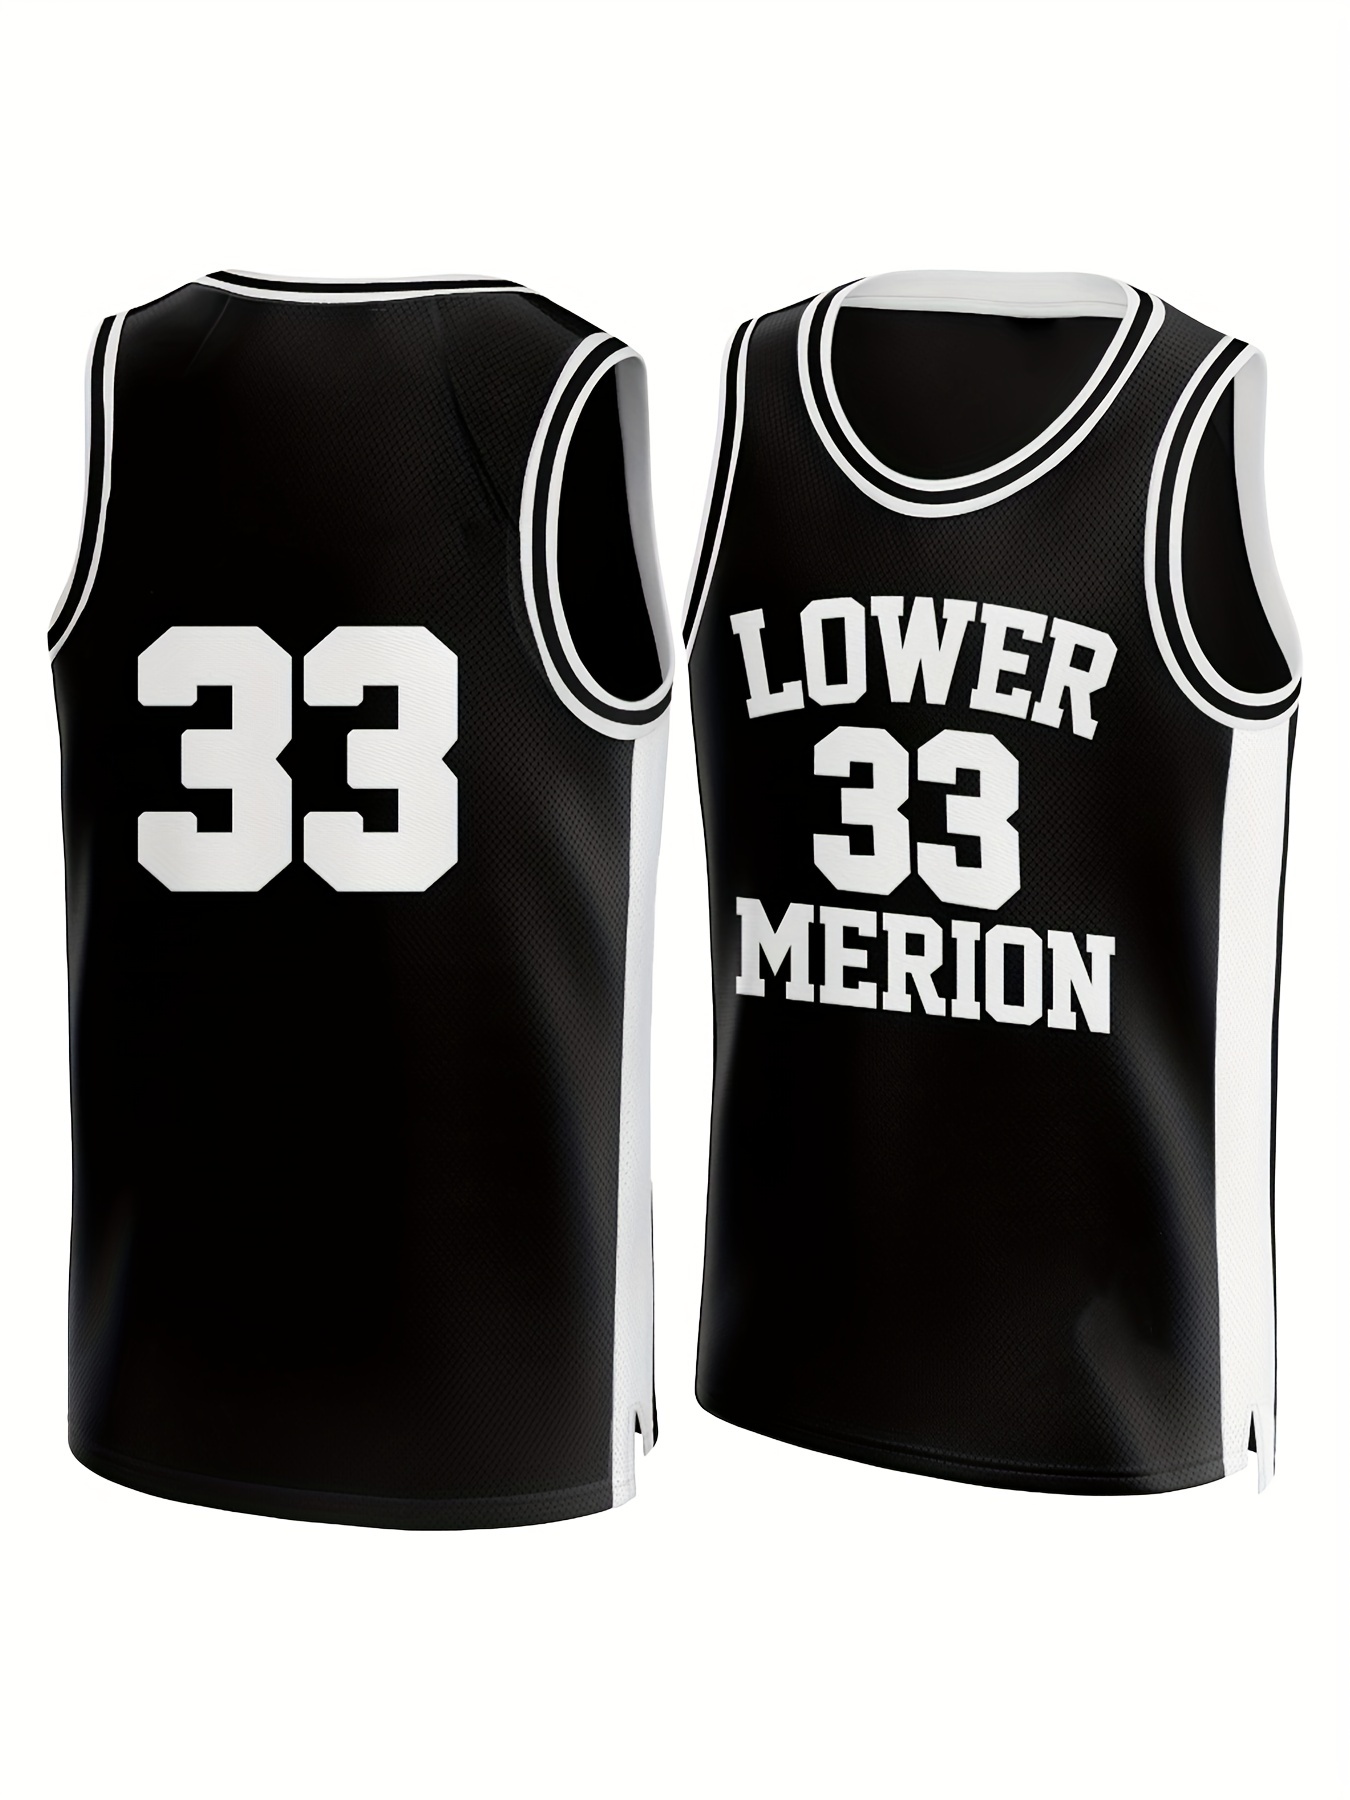 Temu Men's Legend #824 Embroidered Basketball Jersey, Retro Breathable Sports Uniform, Sleeveless Basketball Shirt for Training Competition Party